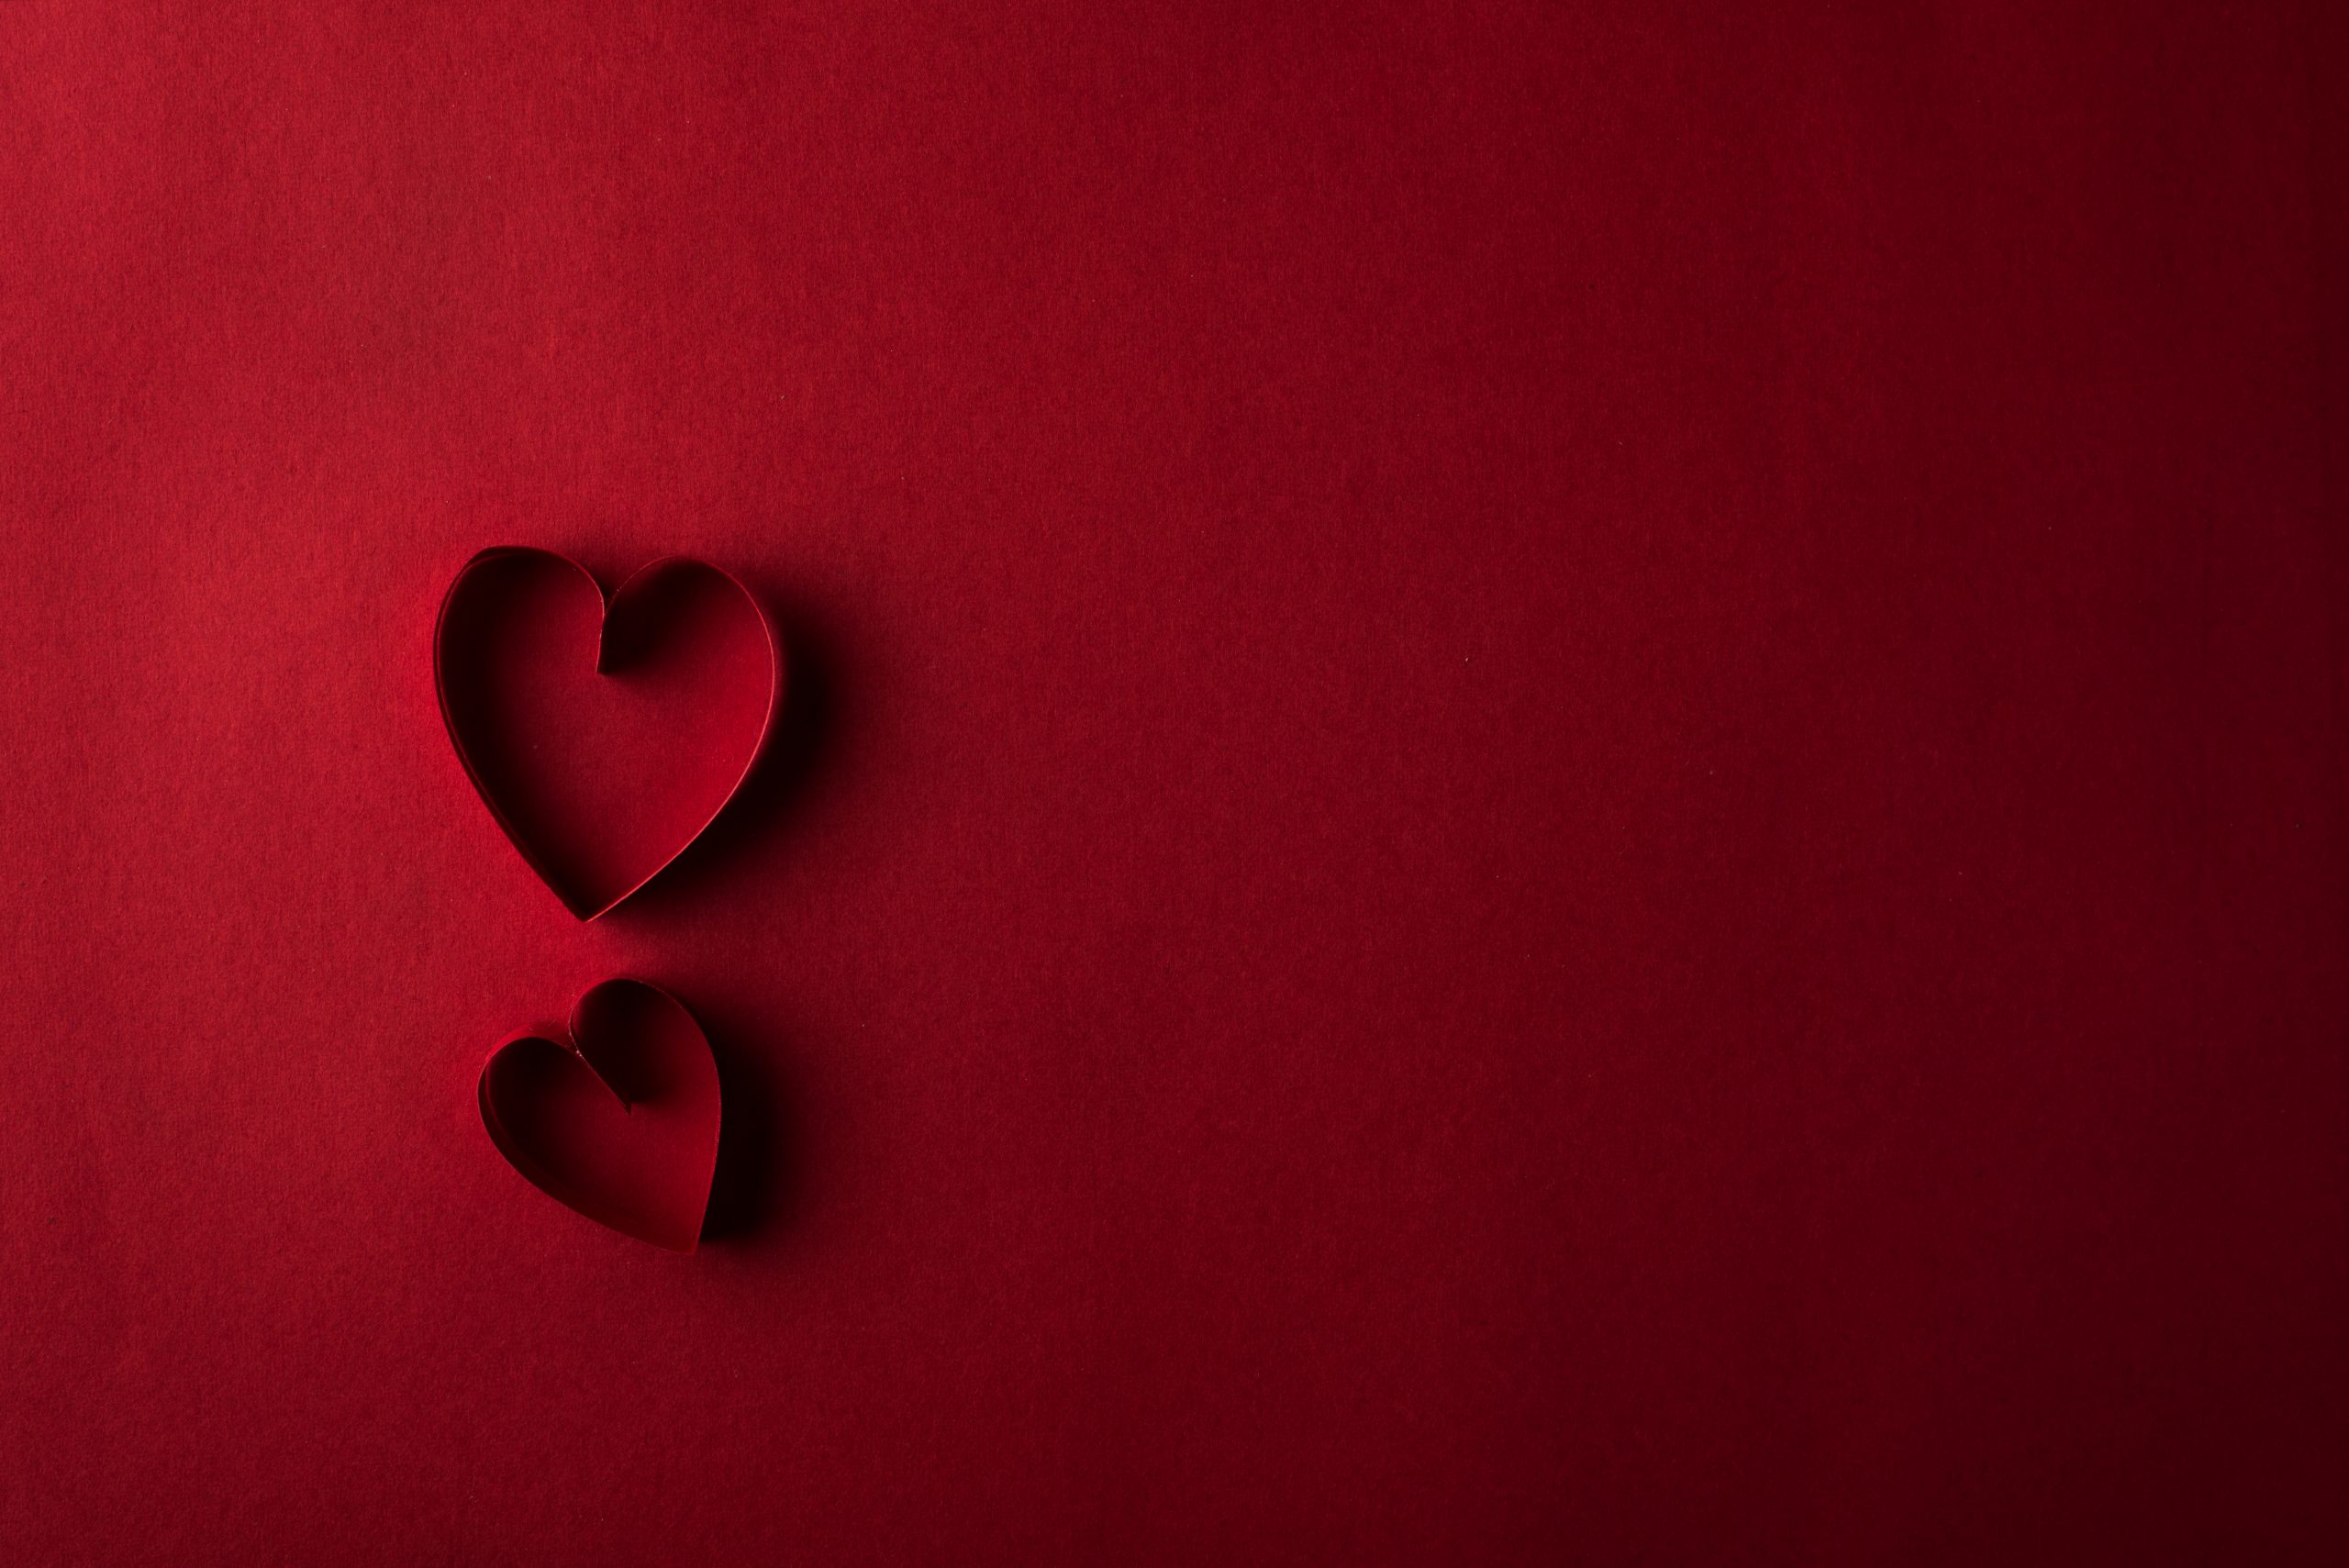 Two Red Hearts Against Red Background